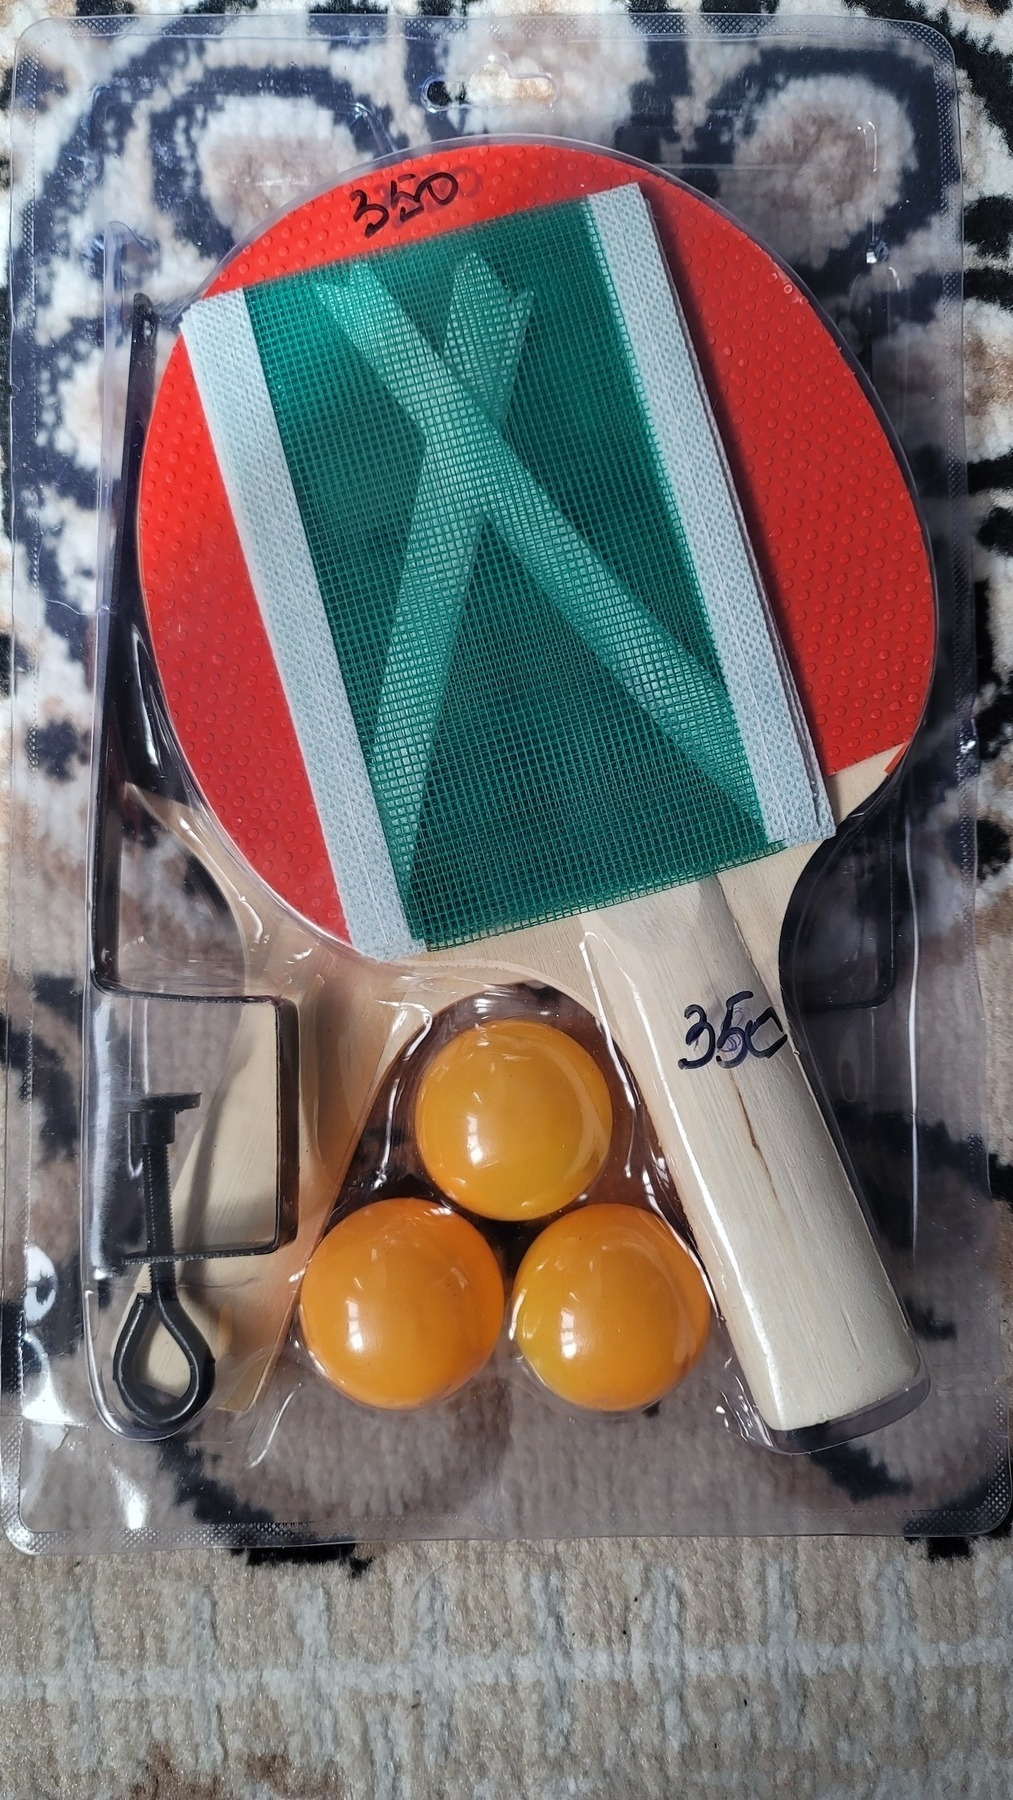 ping pong set in a plastic case including a net, two paddles and three orange balls